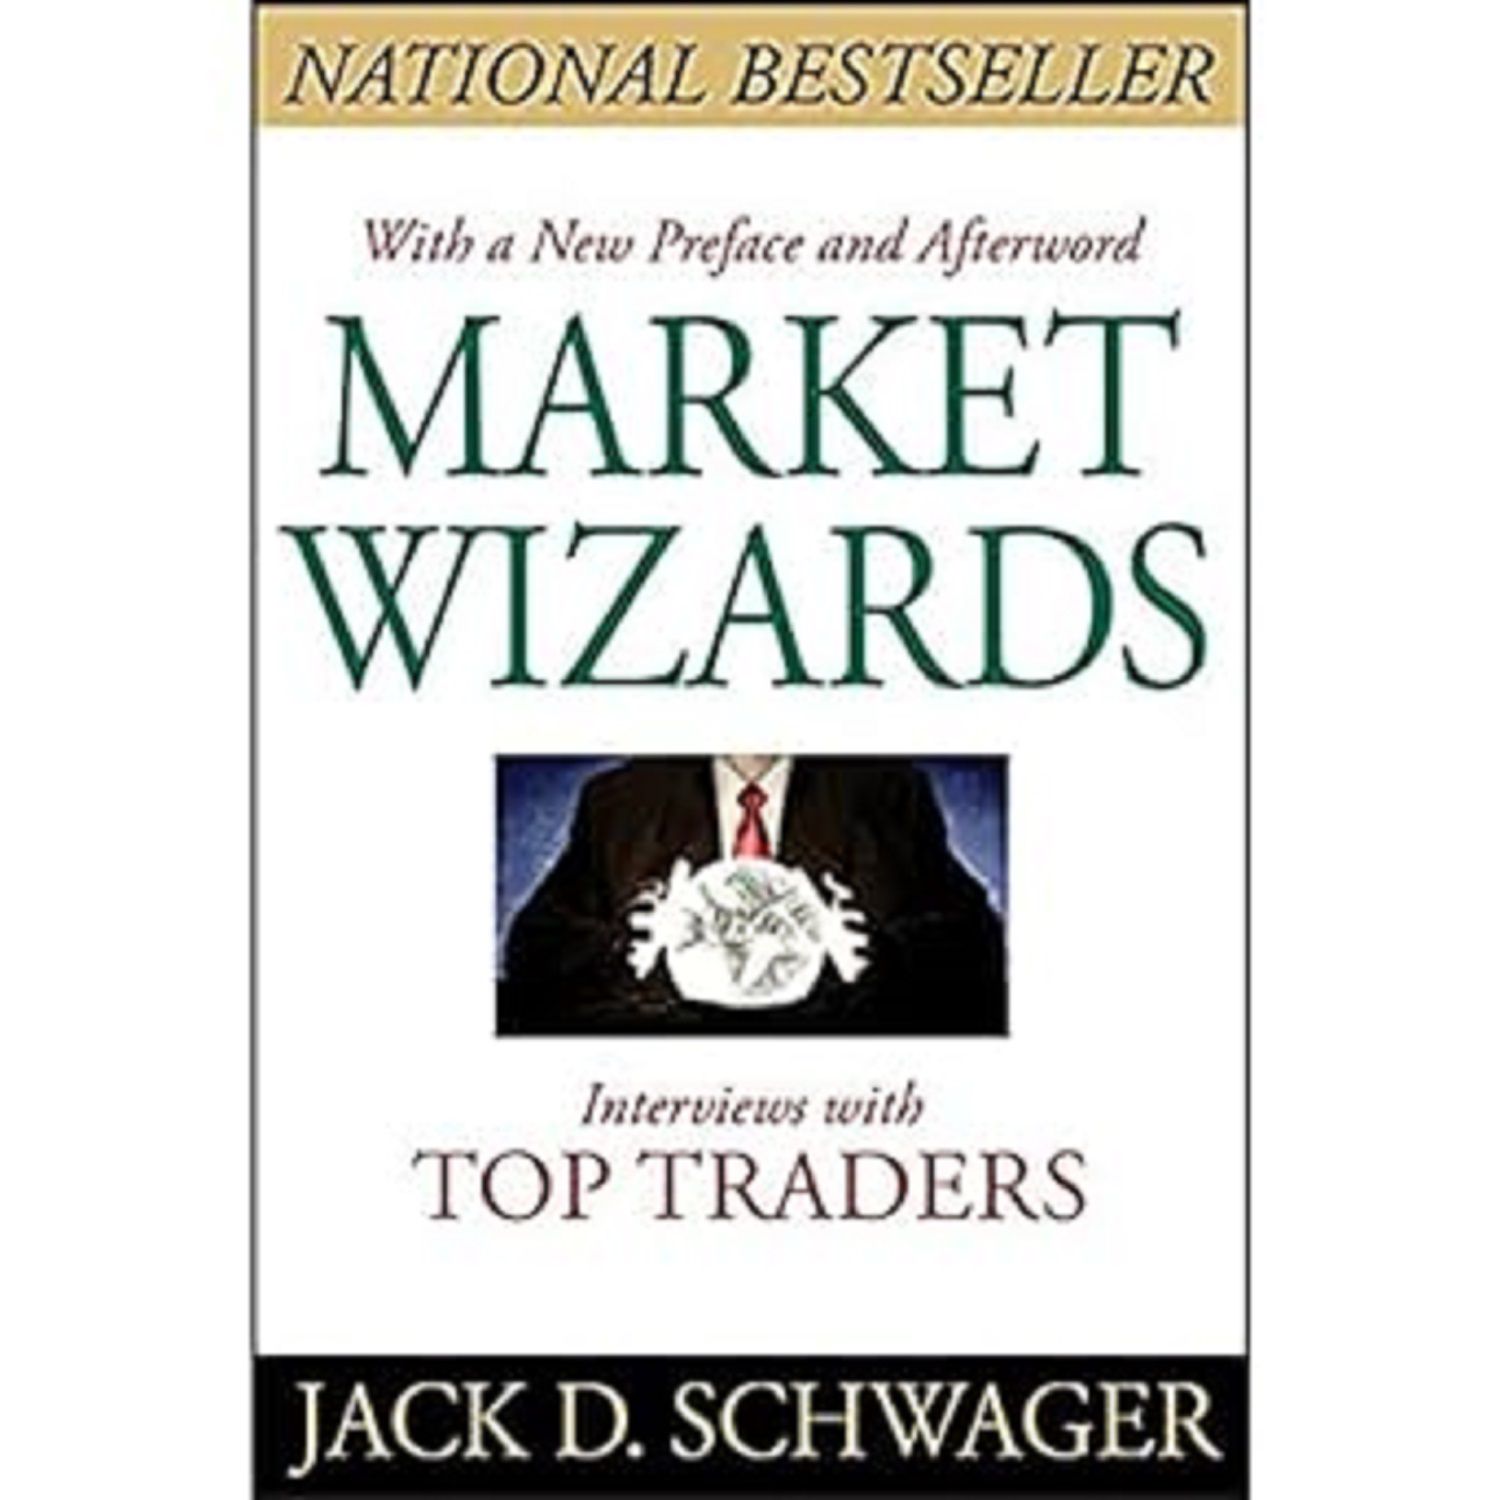     			MARKET WIZARDS BY JACK D. SCHWAGER PAPERBACK ENGLISH EDITION 2023 Paperback – 1 January 2023